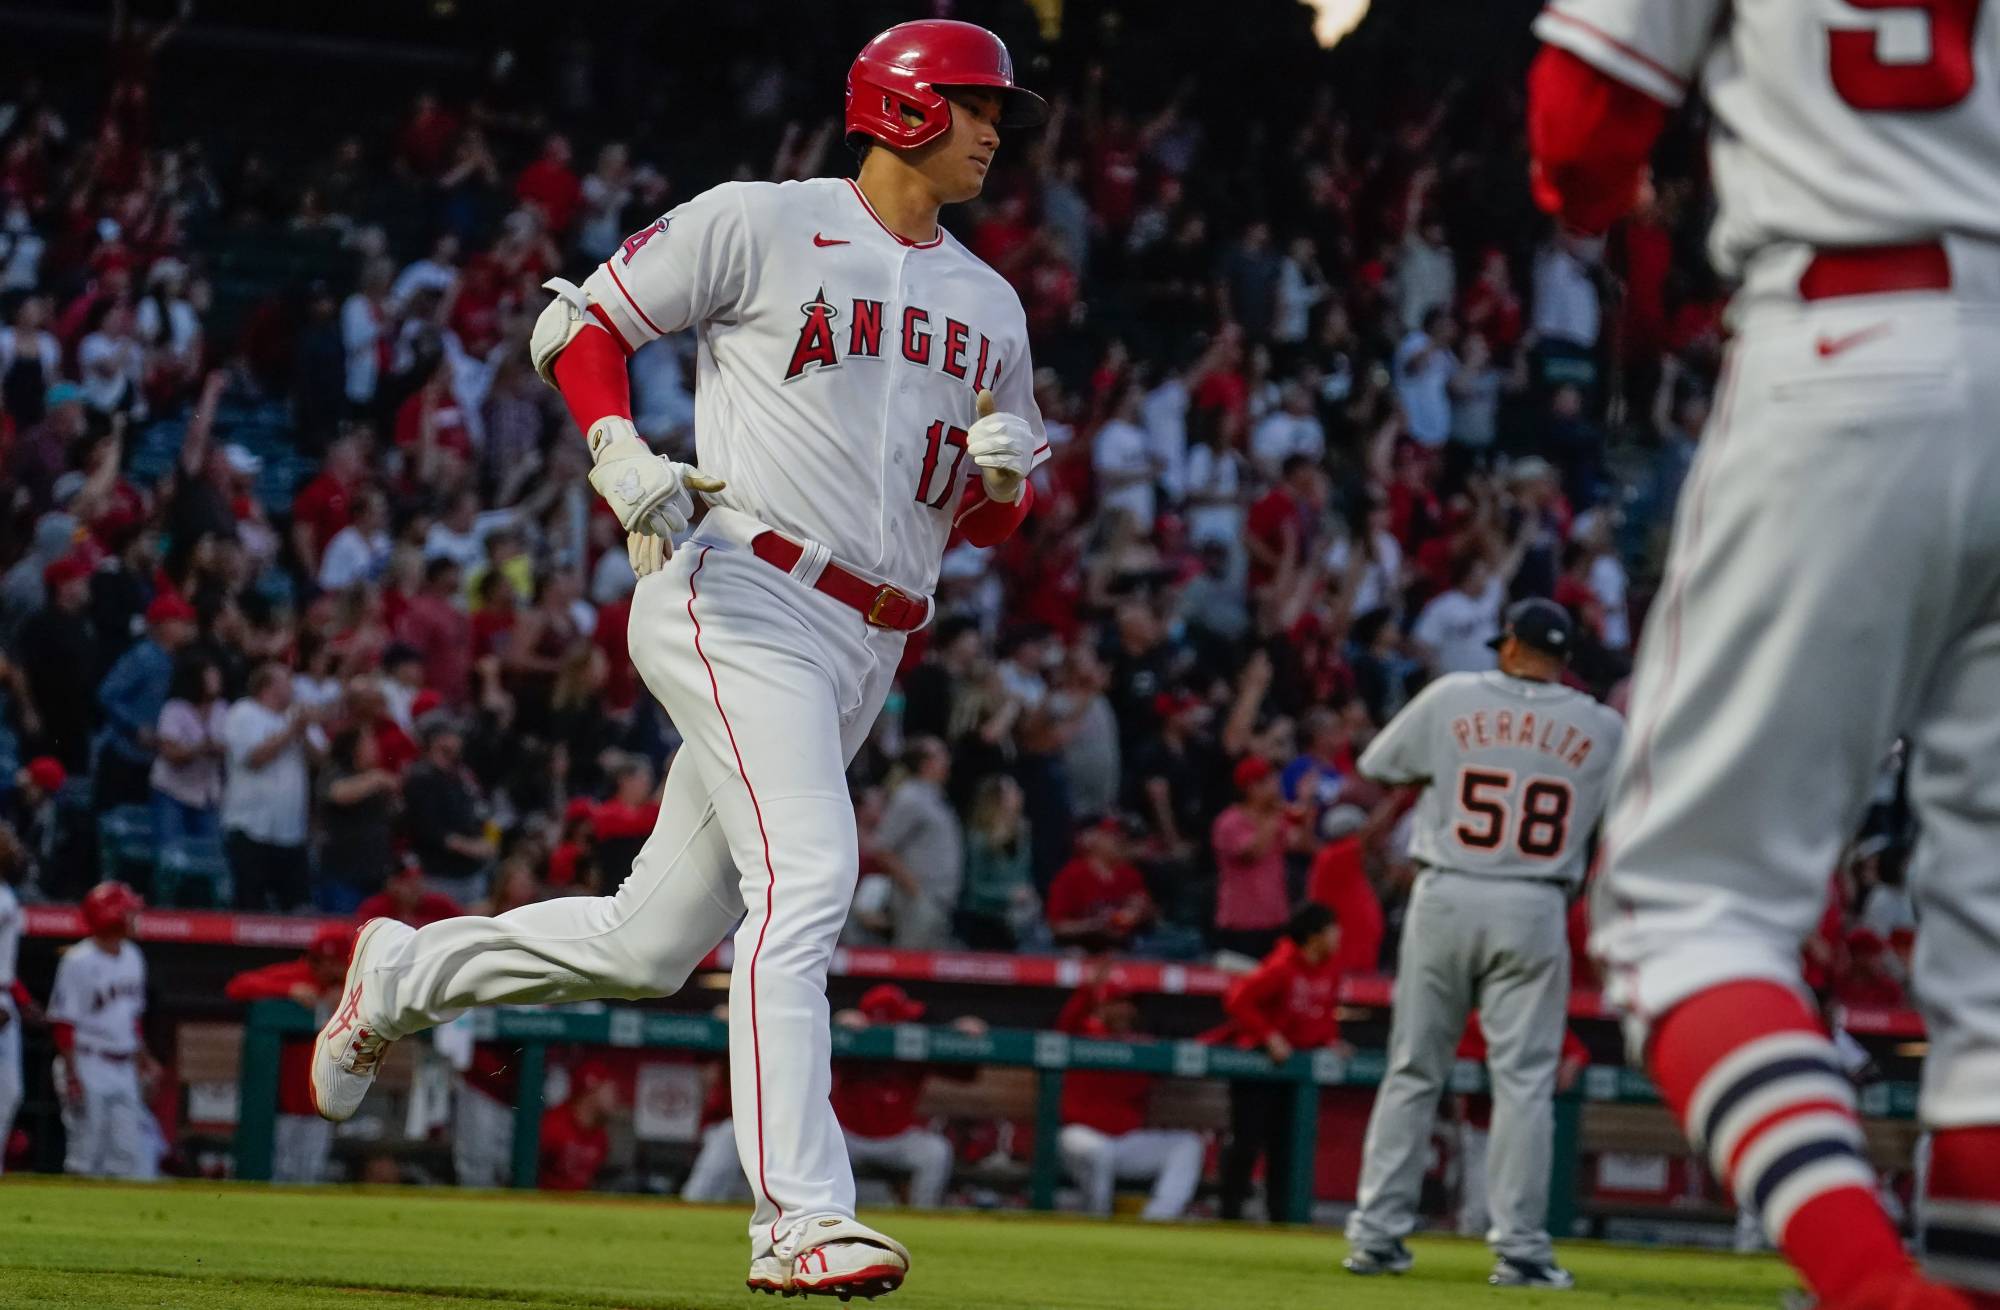 Shohei Ohtani continues home run tear as Angels win - The Japan Times